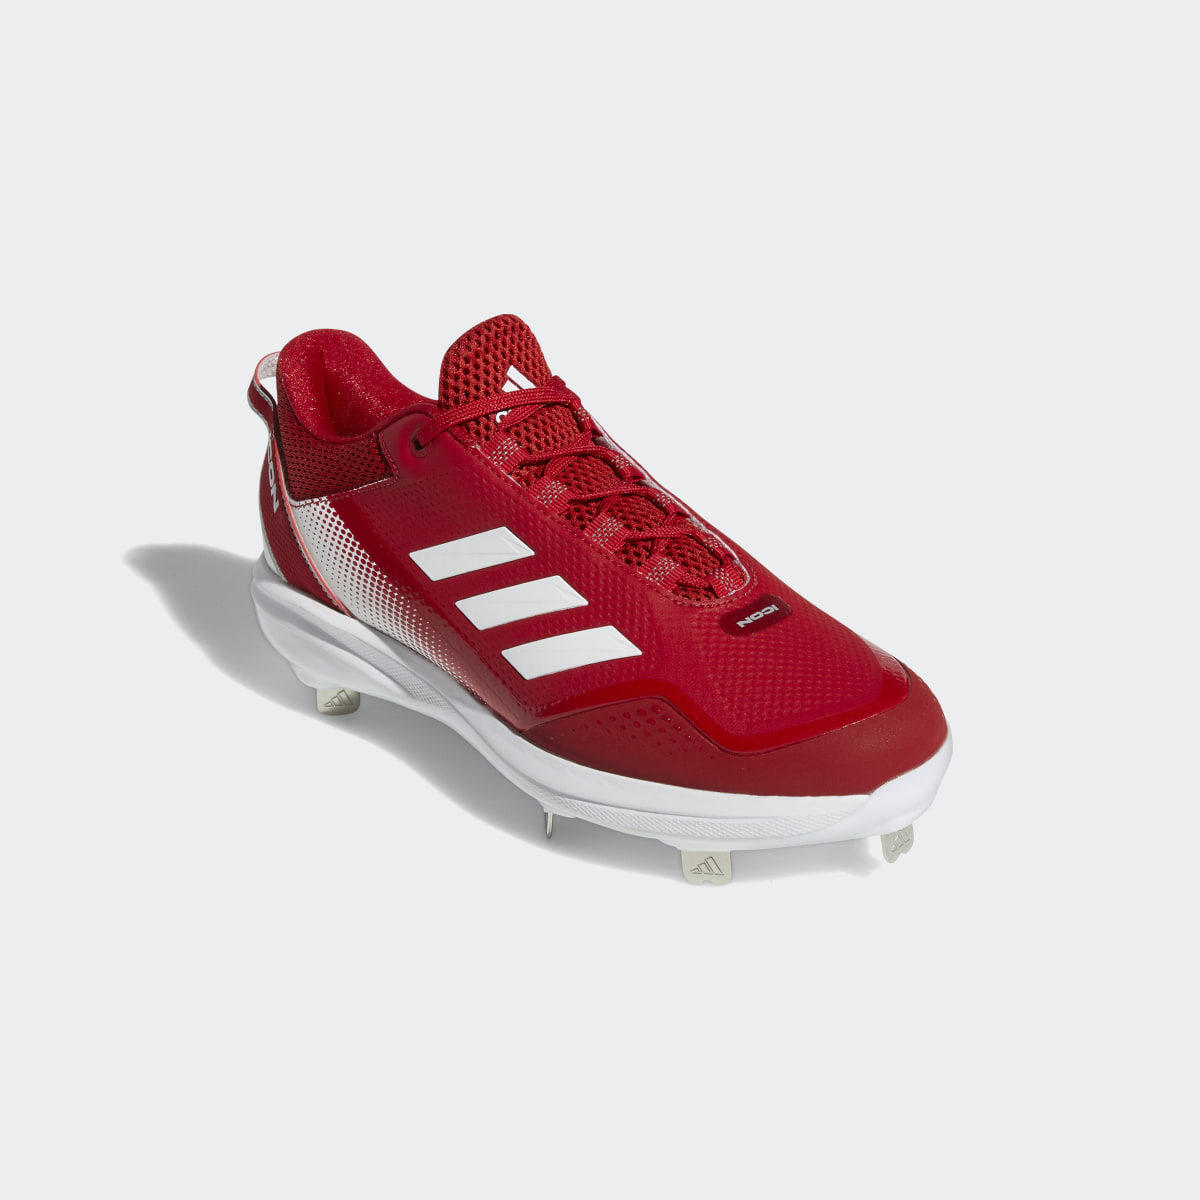 Adidas Icon 7 Cleats. 5